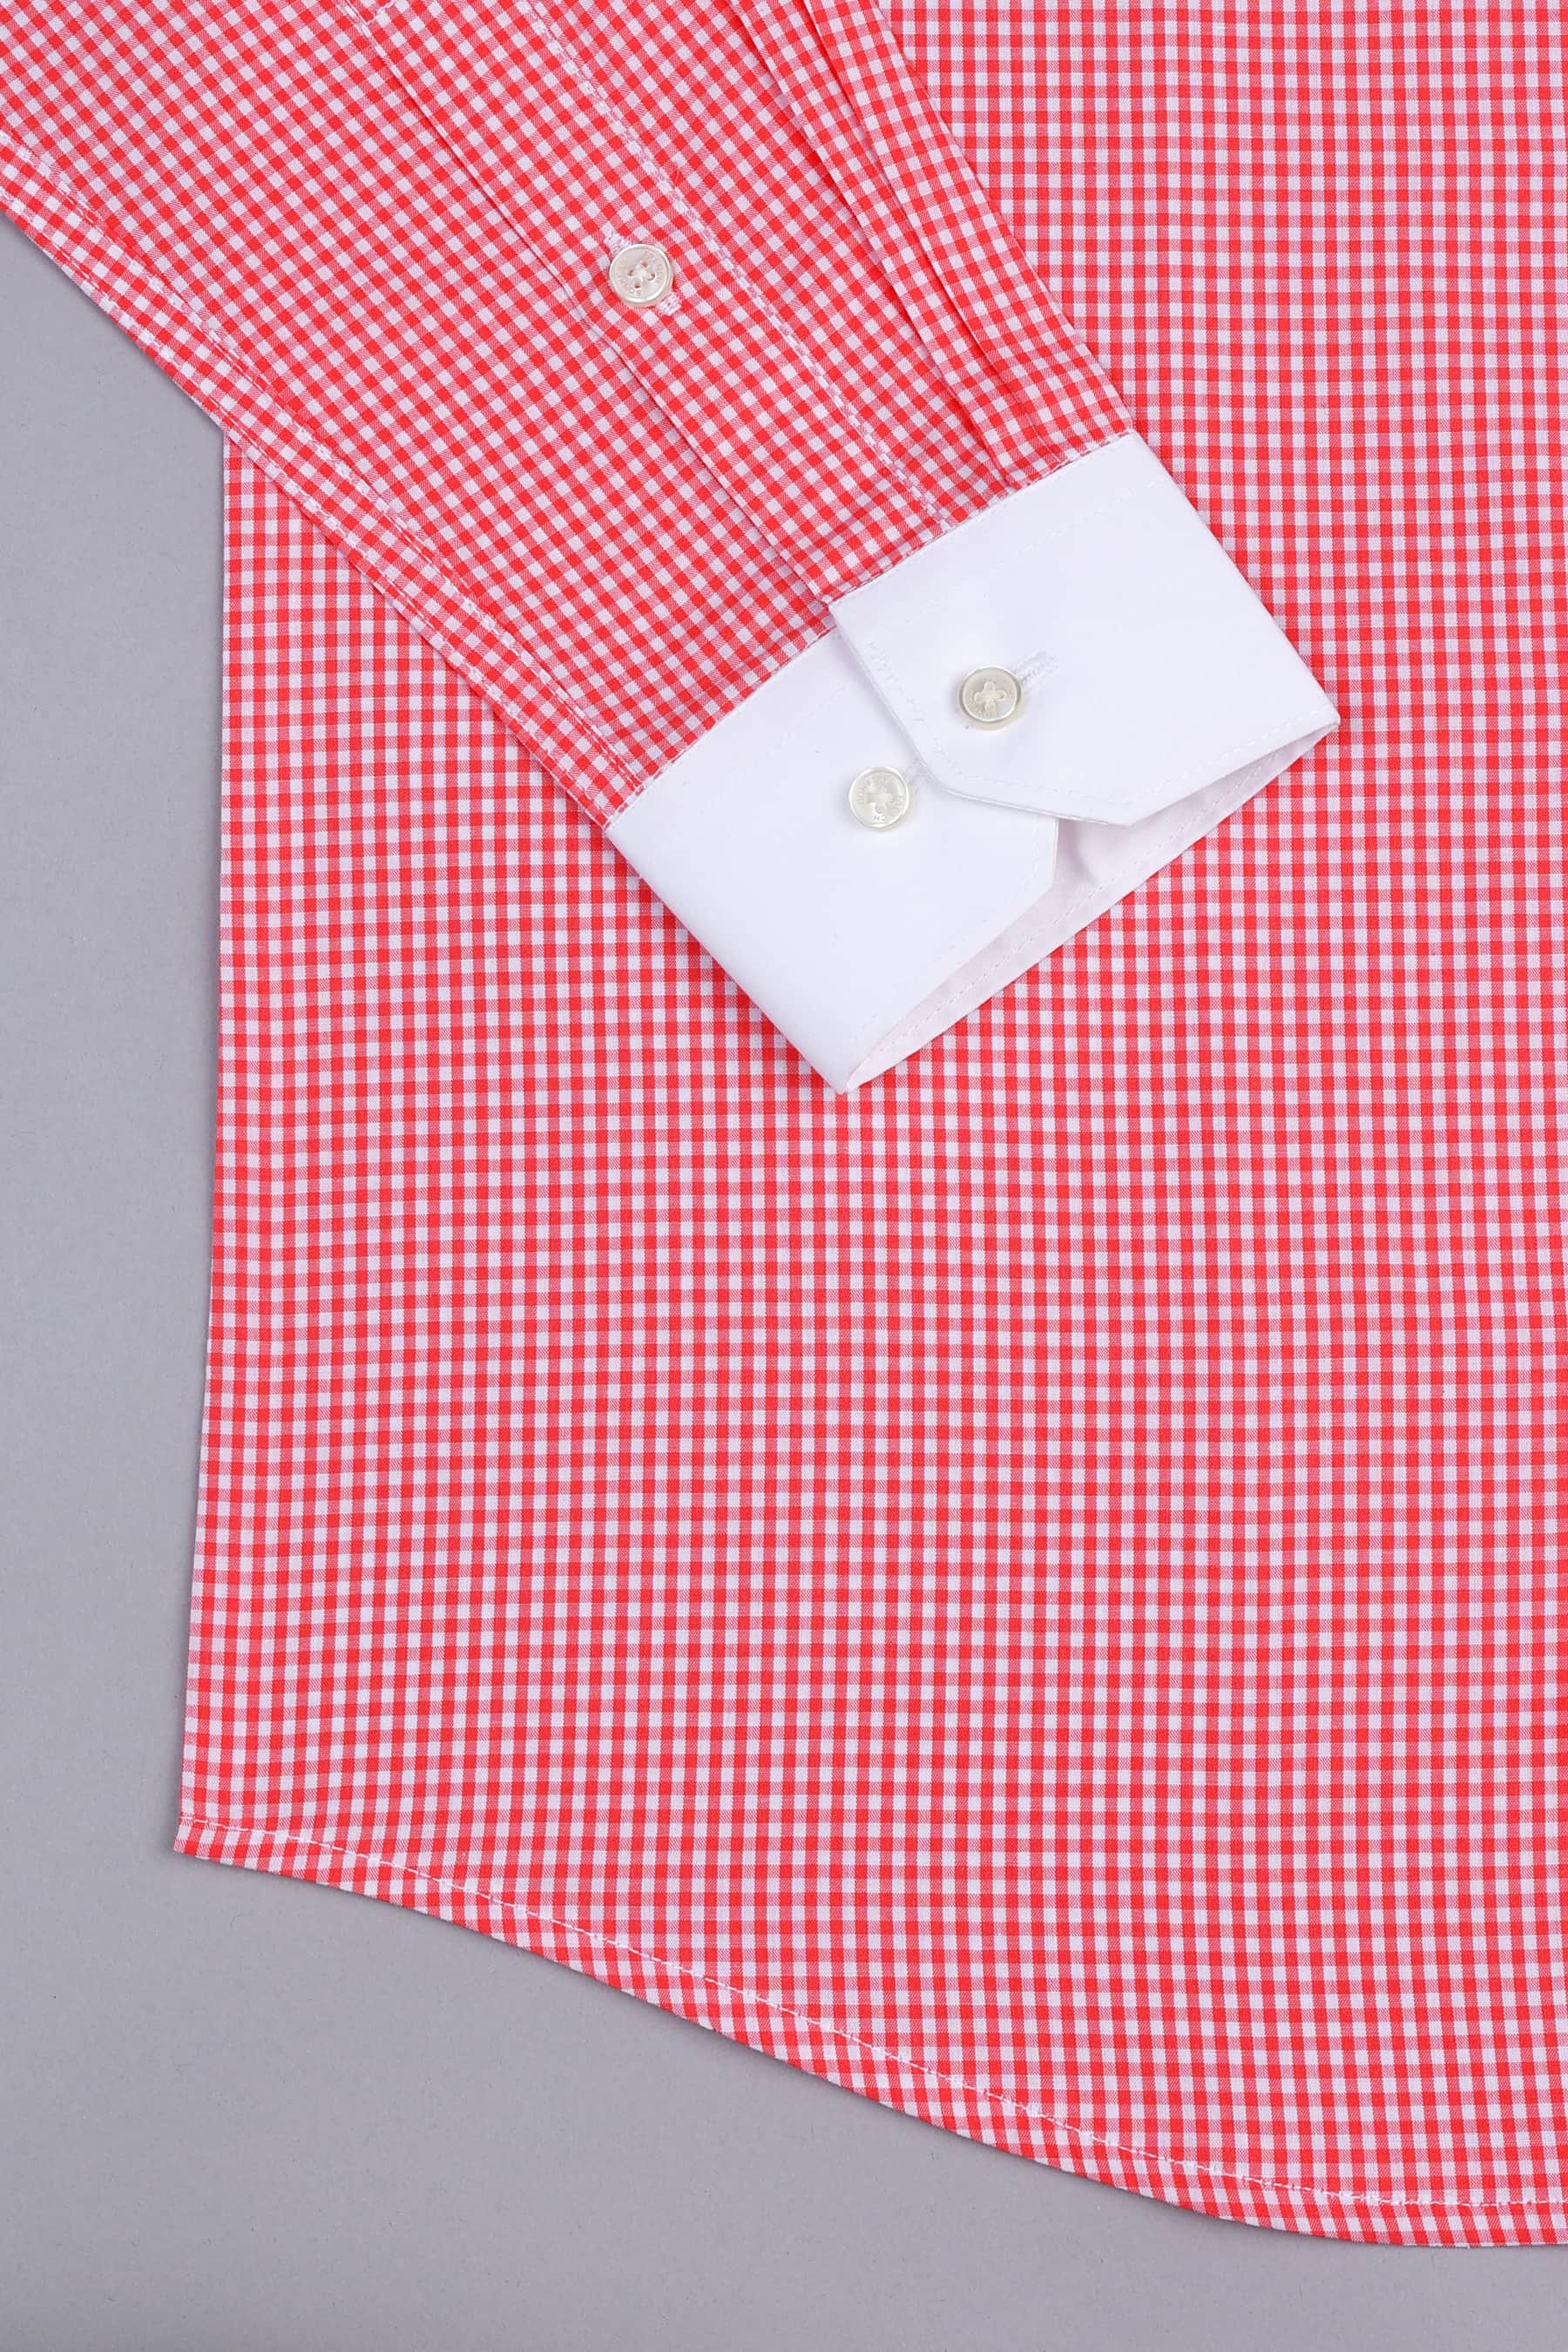 Carrot red with cream white pin check cotton shirt